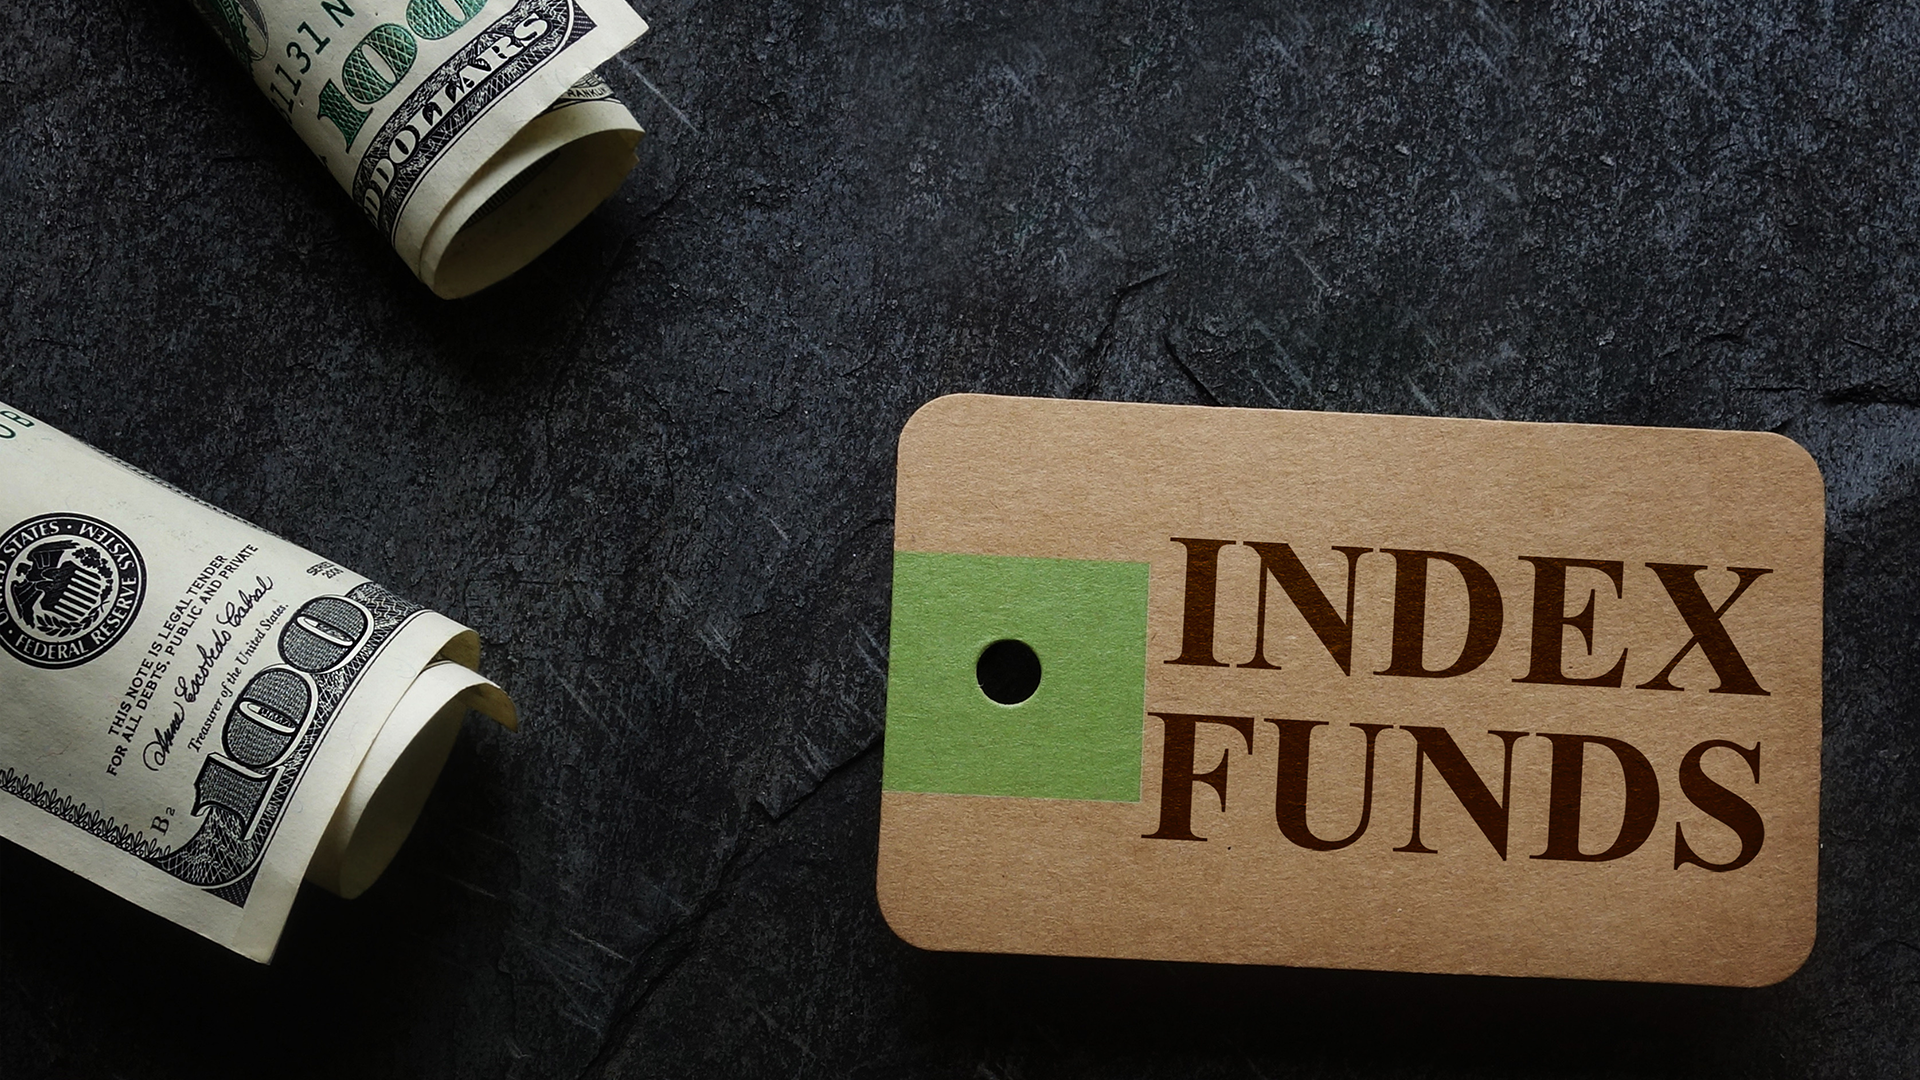 How to invest in INDEX FUNDS step by step. Why we choose index funds over individual stocks